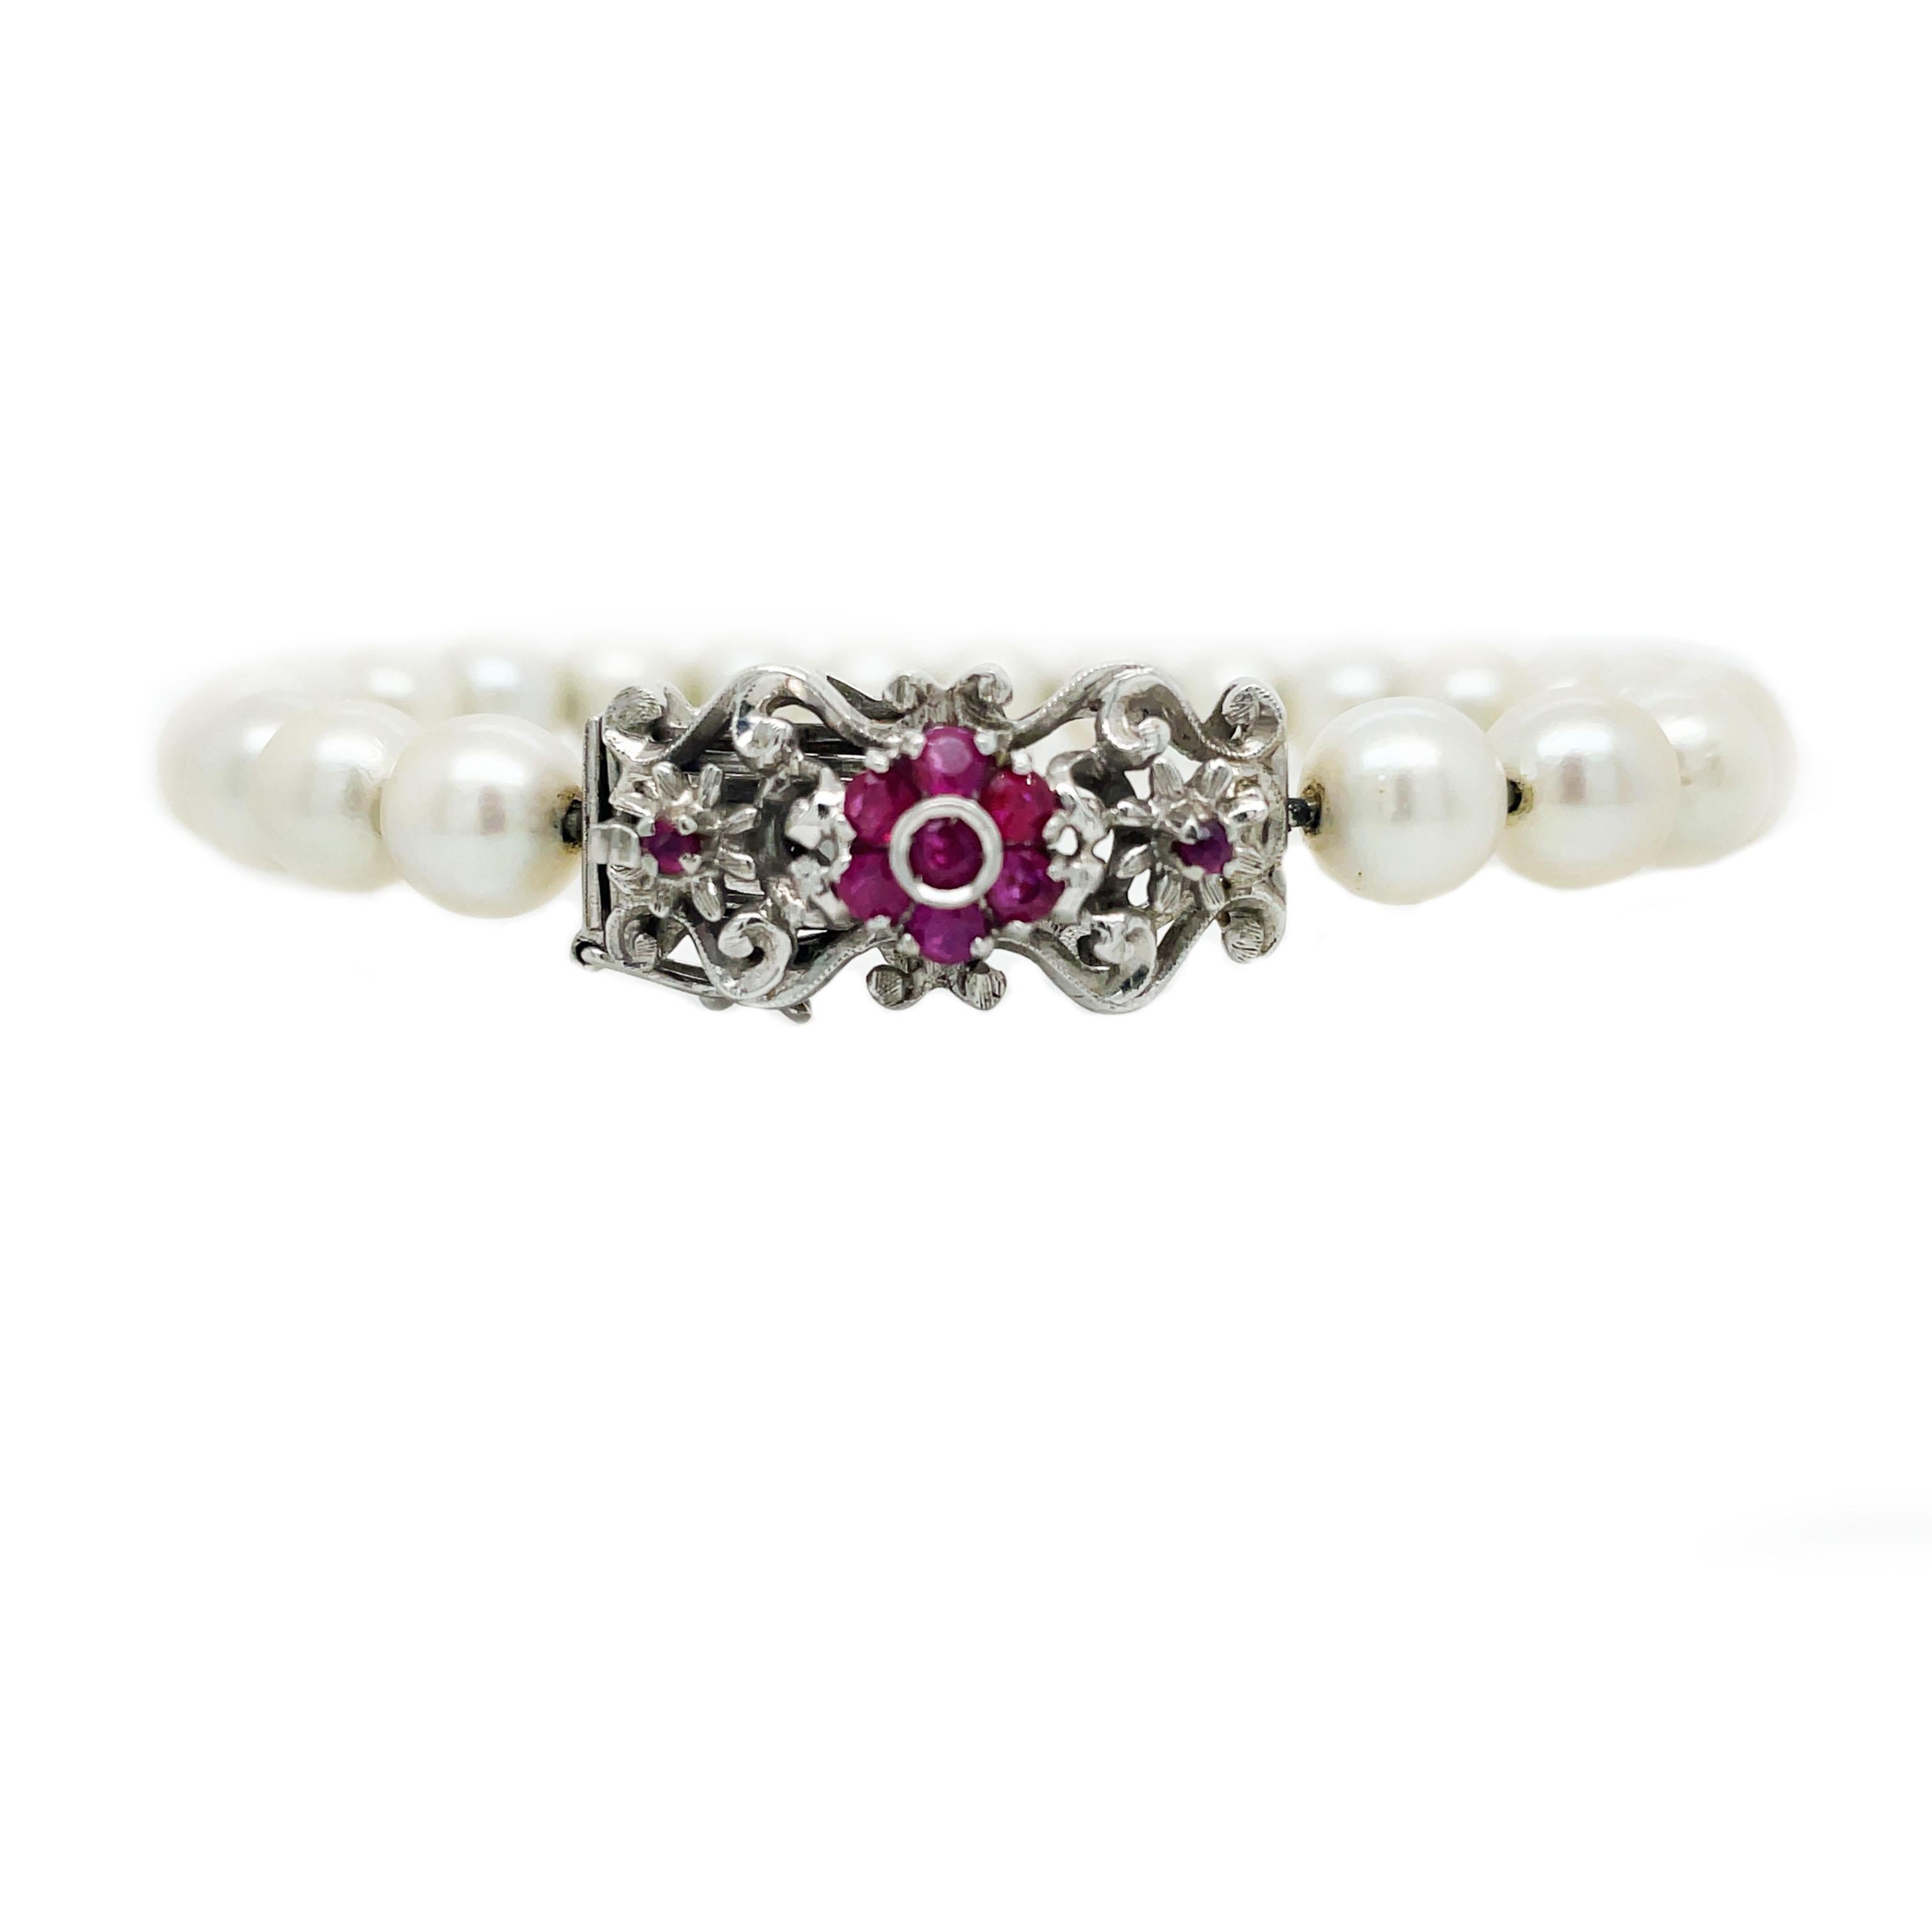 This is a fabulous Mid-Century Modern bracelet crafted in 18K white gold showcasing beautiful white pearls and vibrant rubies adorning the clasp. A flowing floral cluster of dazzling rubies framed in bright 18K white gold forms the unique decorative